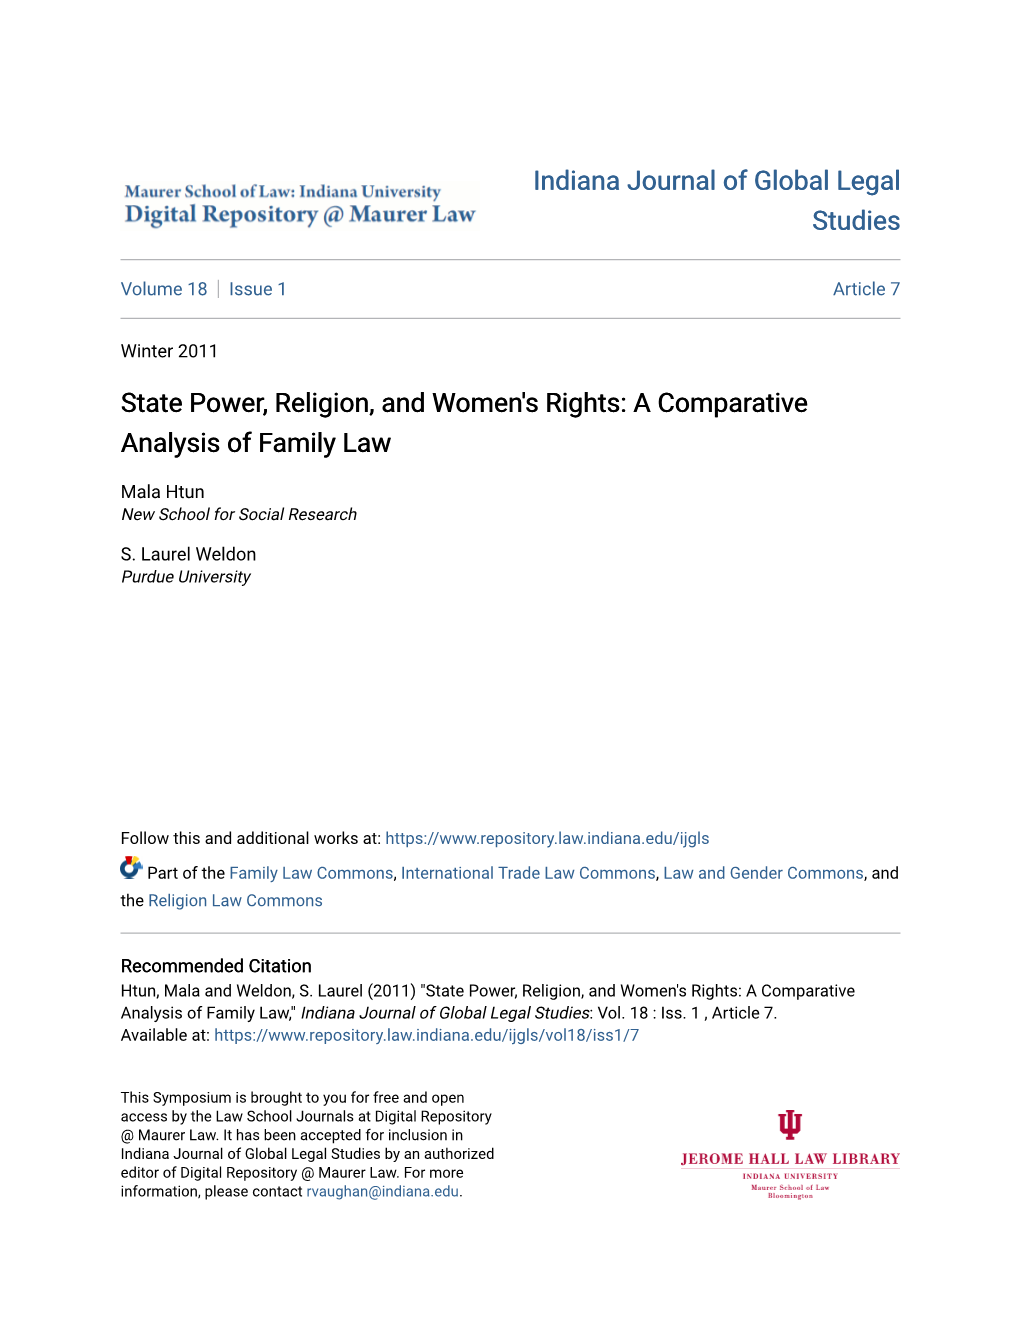 State Power, Religion, and Women's Rights: a Comparative Analysis of Family Law